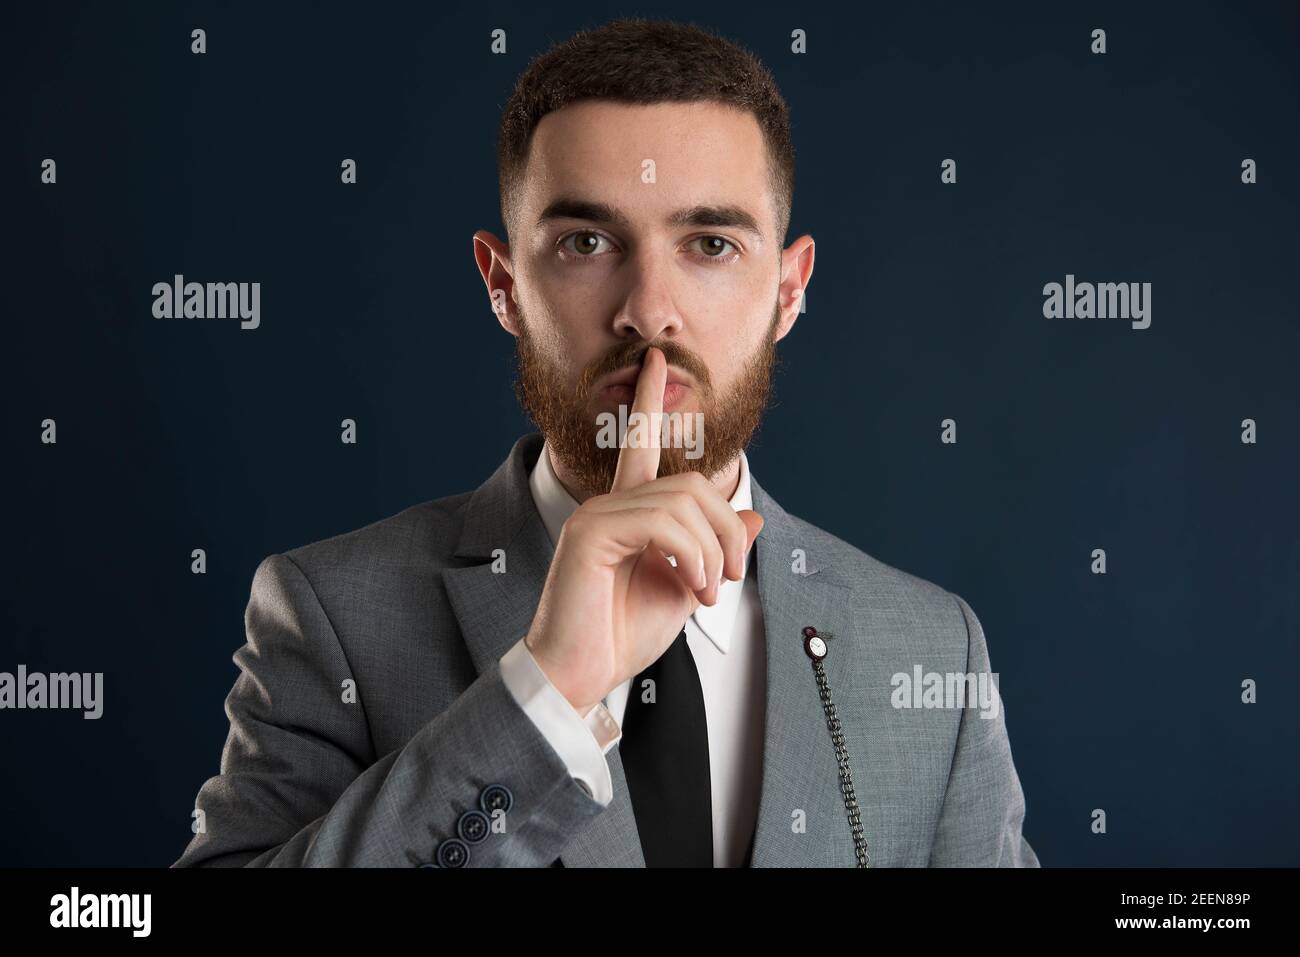 Young entrepreneur asking for silence wearing a grey suit and black tie and a beard Stock Photo